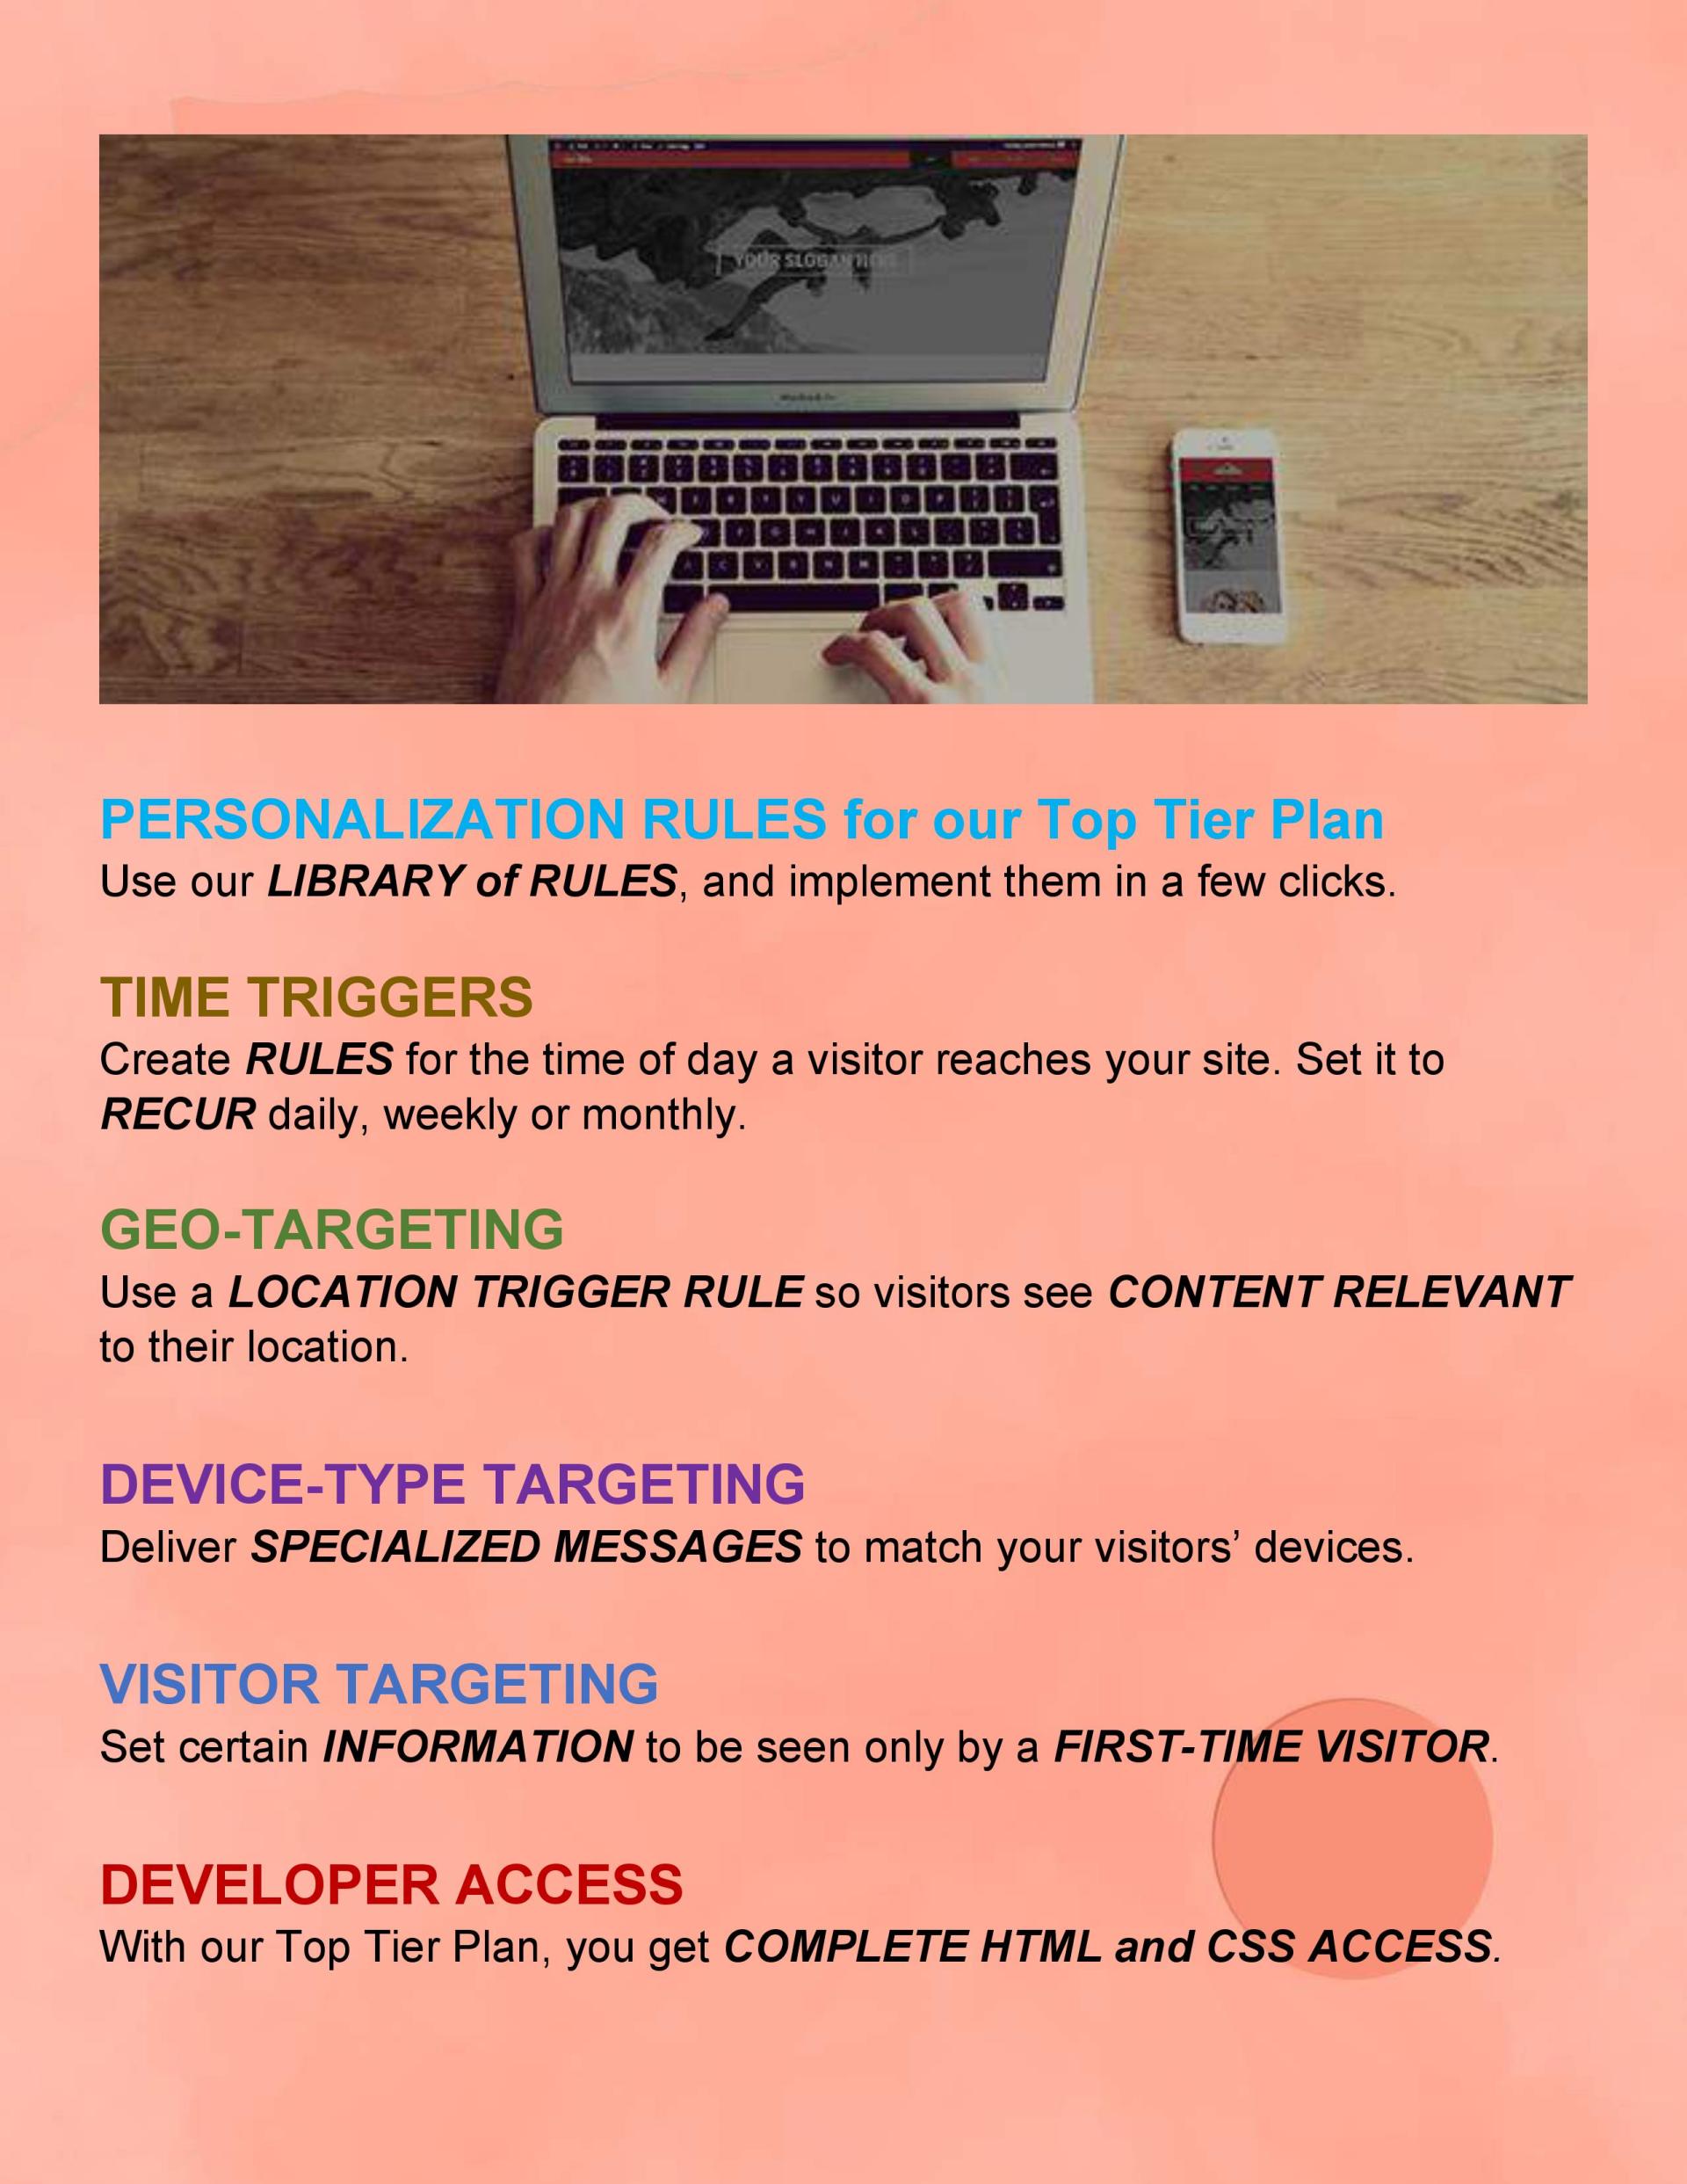 Why Churchweb Canada? Personalization rules for our top tier plan, Time triggers, Geo-targeting, Device-type targeting, Visitor targeting, Developer access